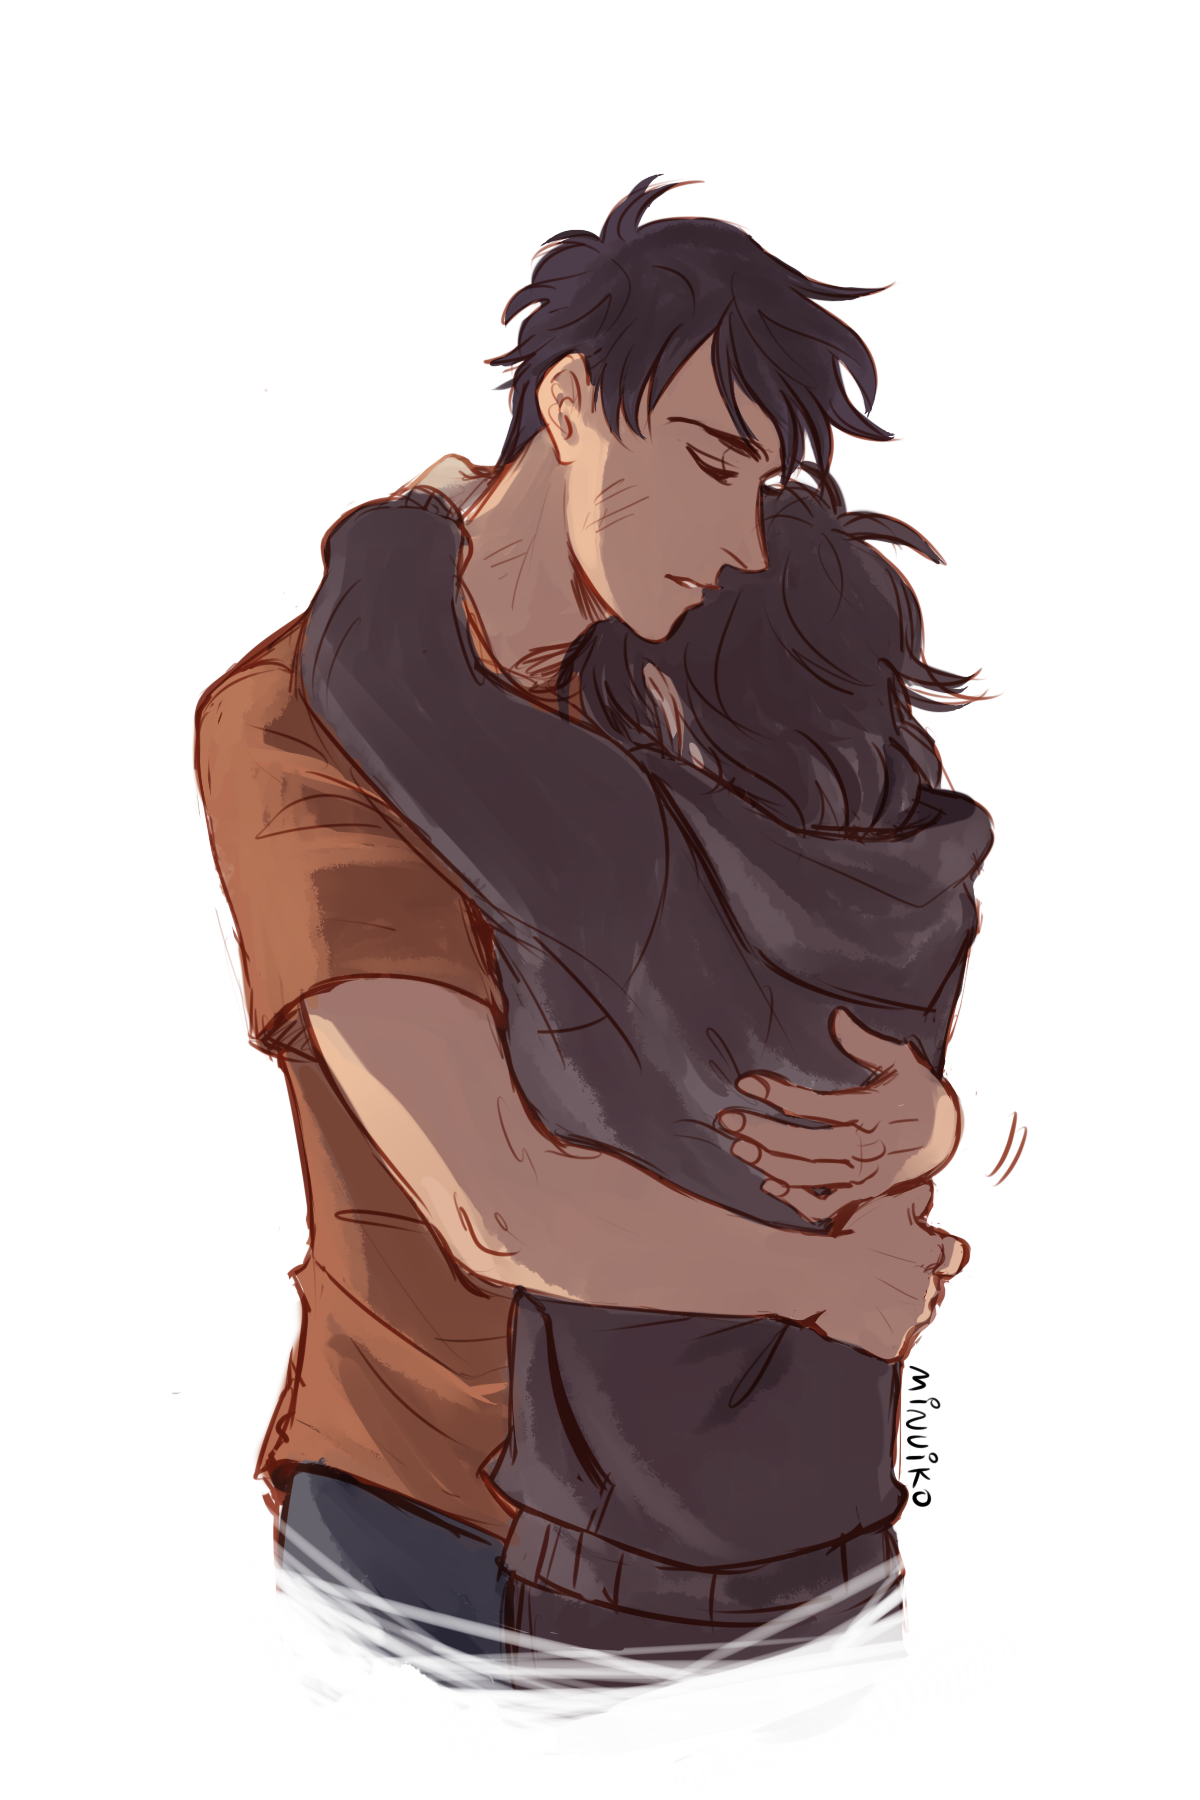 Percico is the slash ship between Percy Jackson and Nico di Angelo from the...